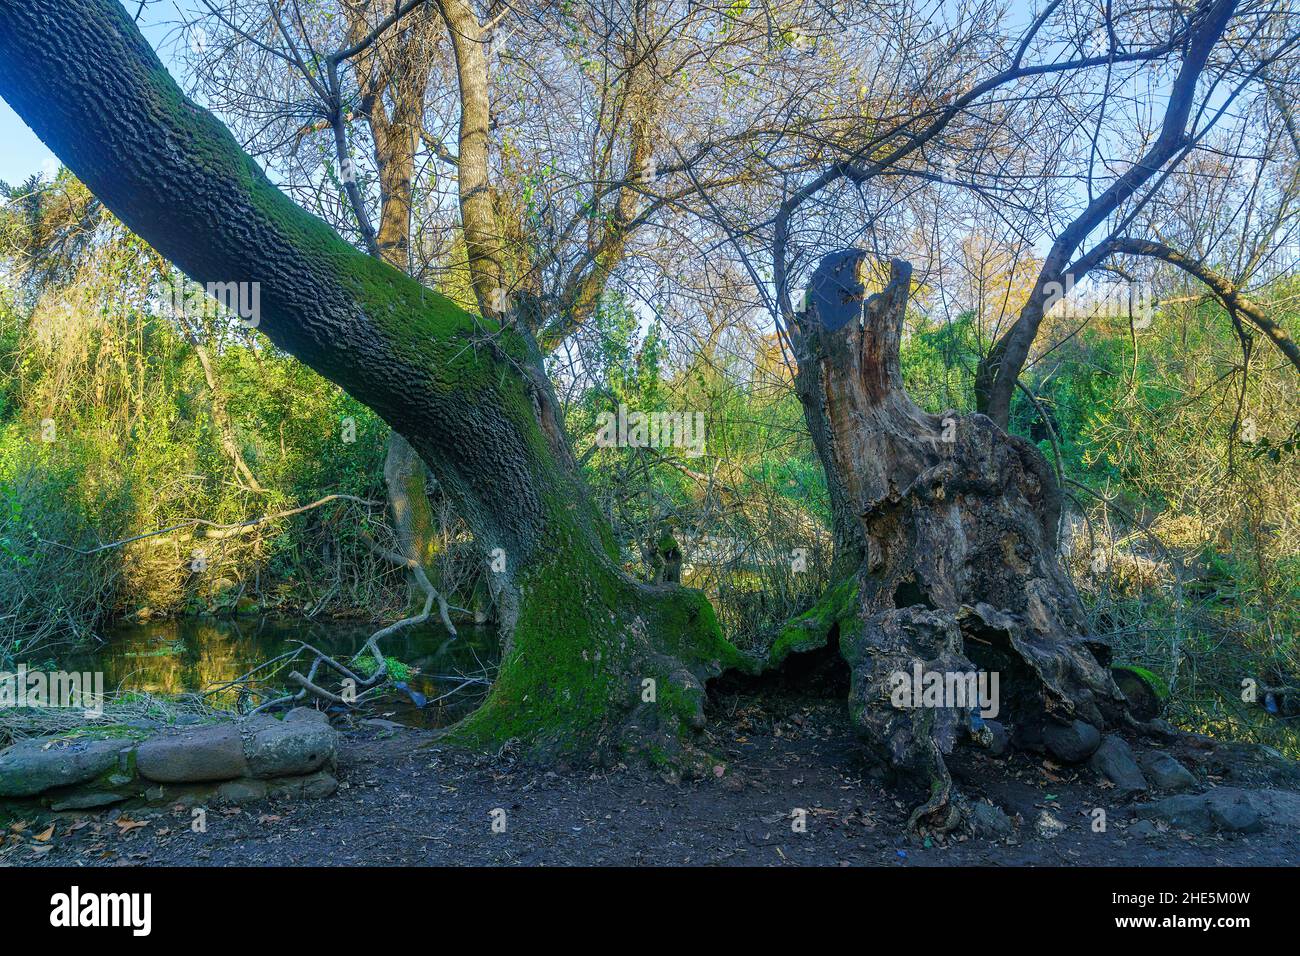 View of a large, old narrow-leafed ash tree, called Pooh Bear Tree, in Tel Dan Nature Reserve, Northern Israel Stock Photo